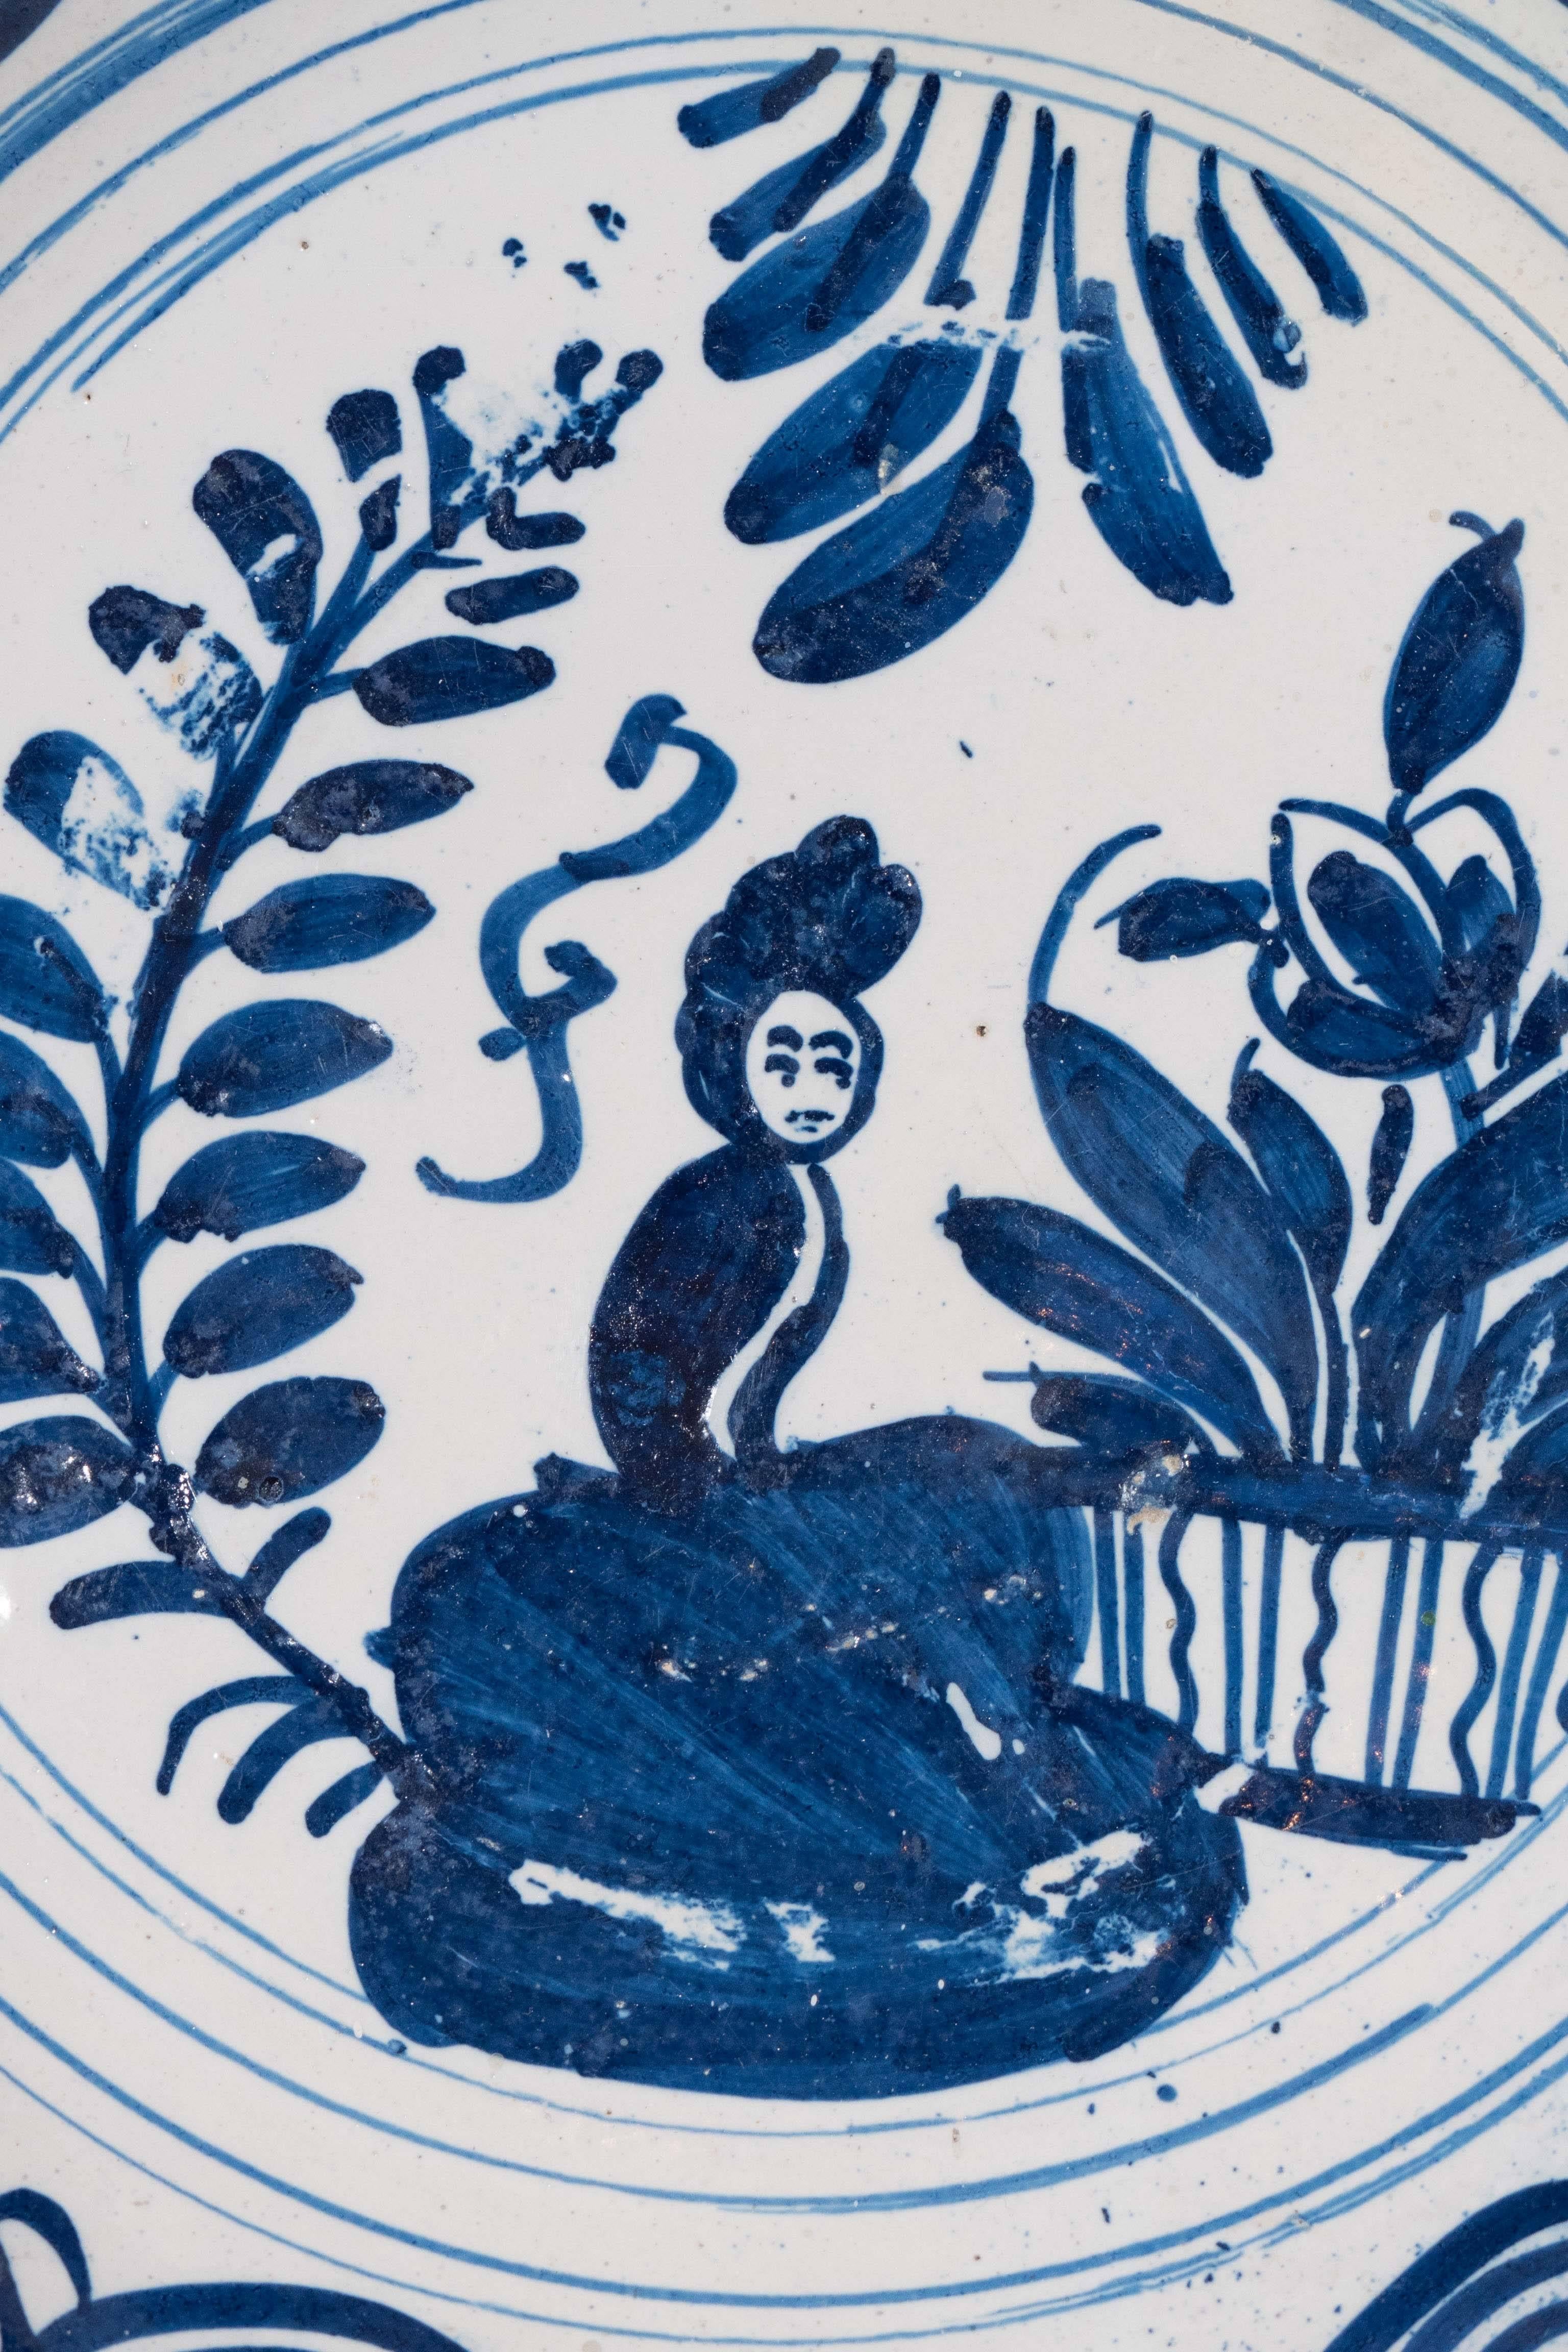 We are pleased to offer this early 18th-century Dutch Delft charger painted in cobalt blue with a scene showing a lady seated in a  garden. The border is decorated with linked concentric circles.
It is the naive aspect of this charger that makes it